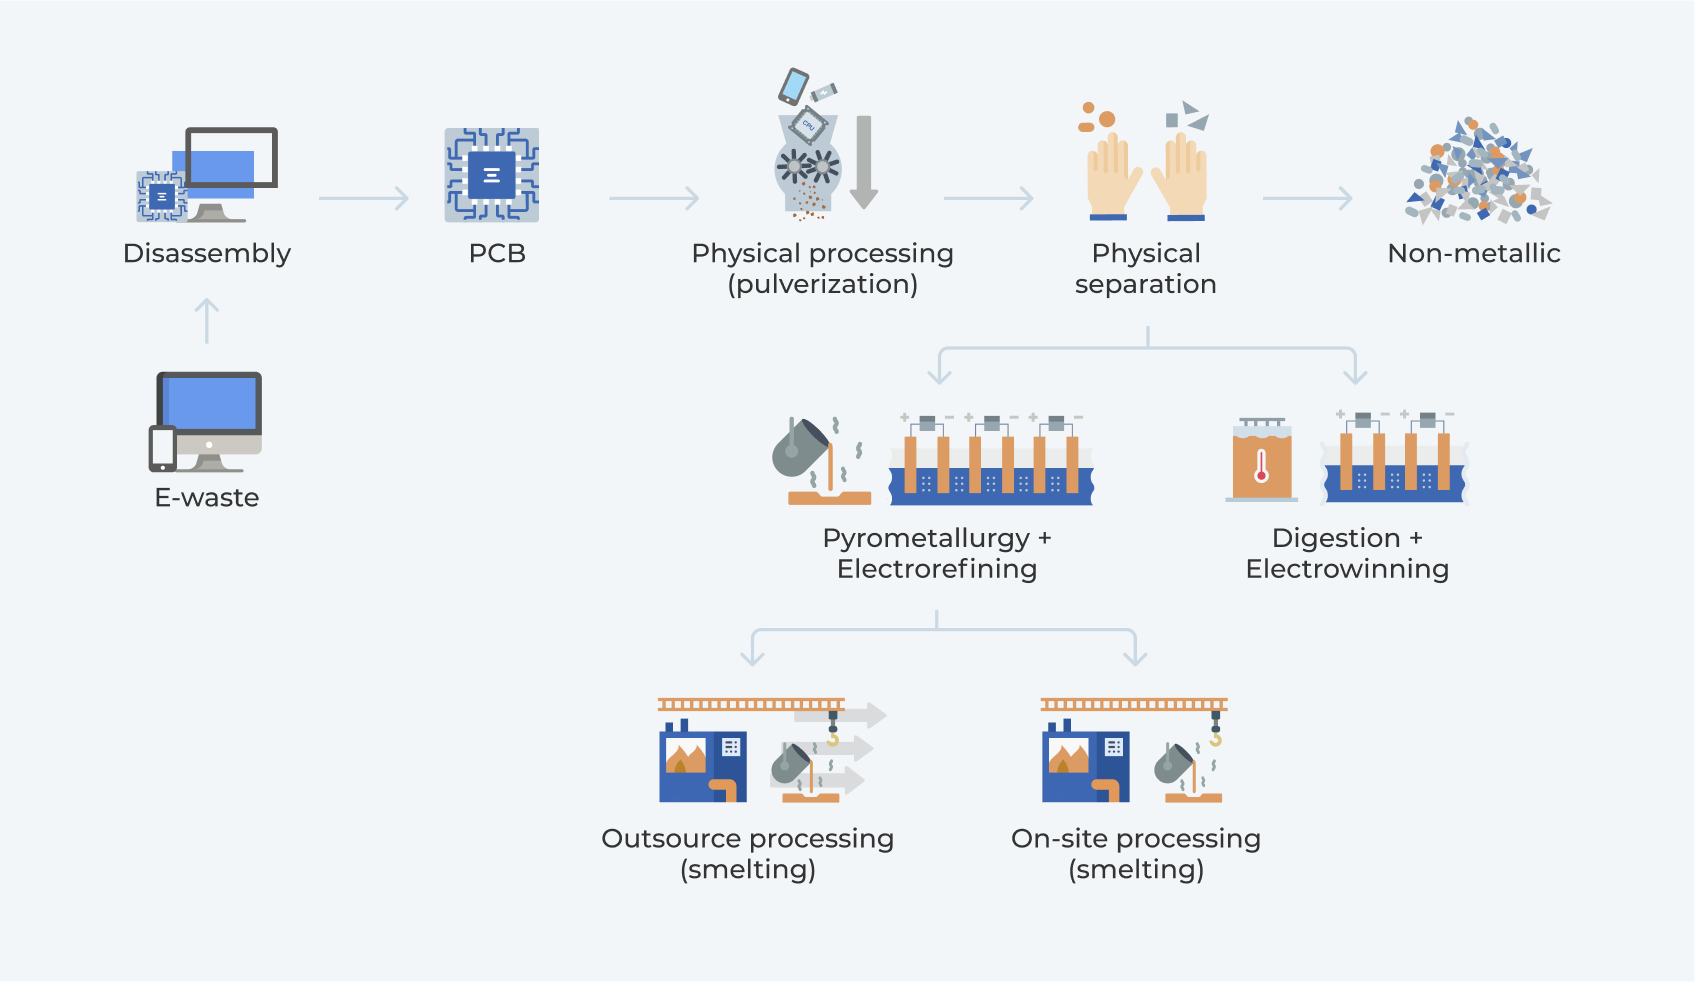 3.	Processing routes for e-waste recycling